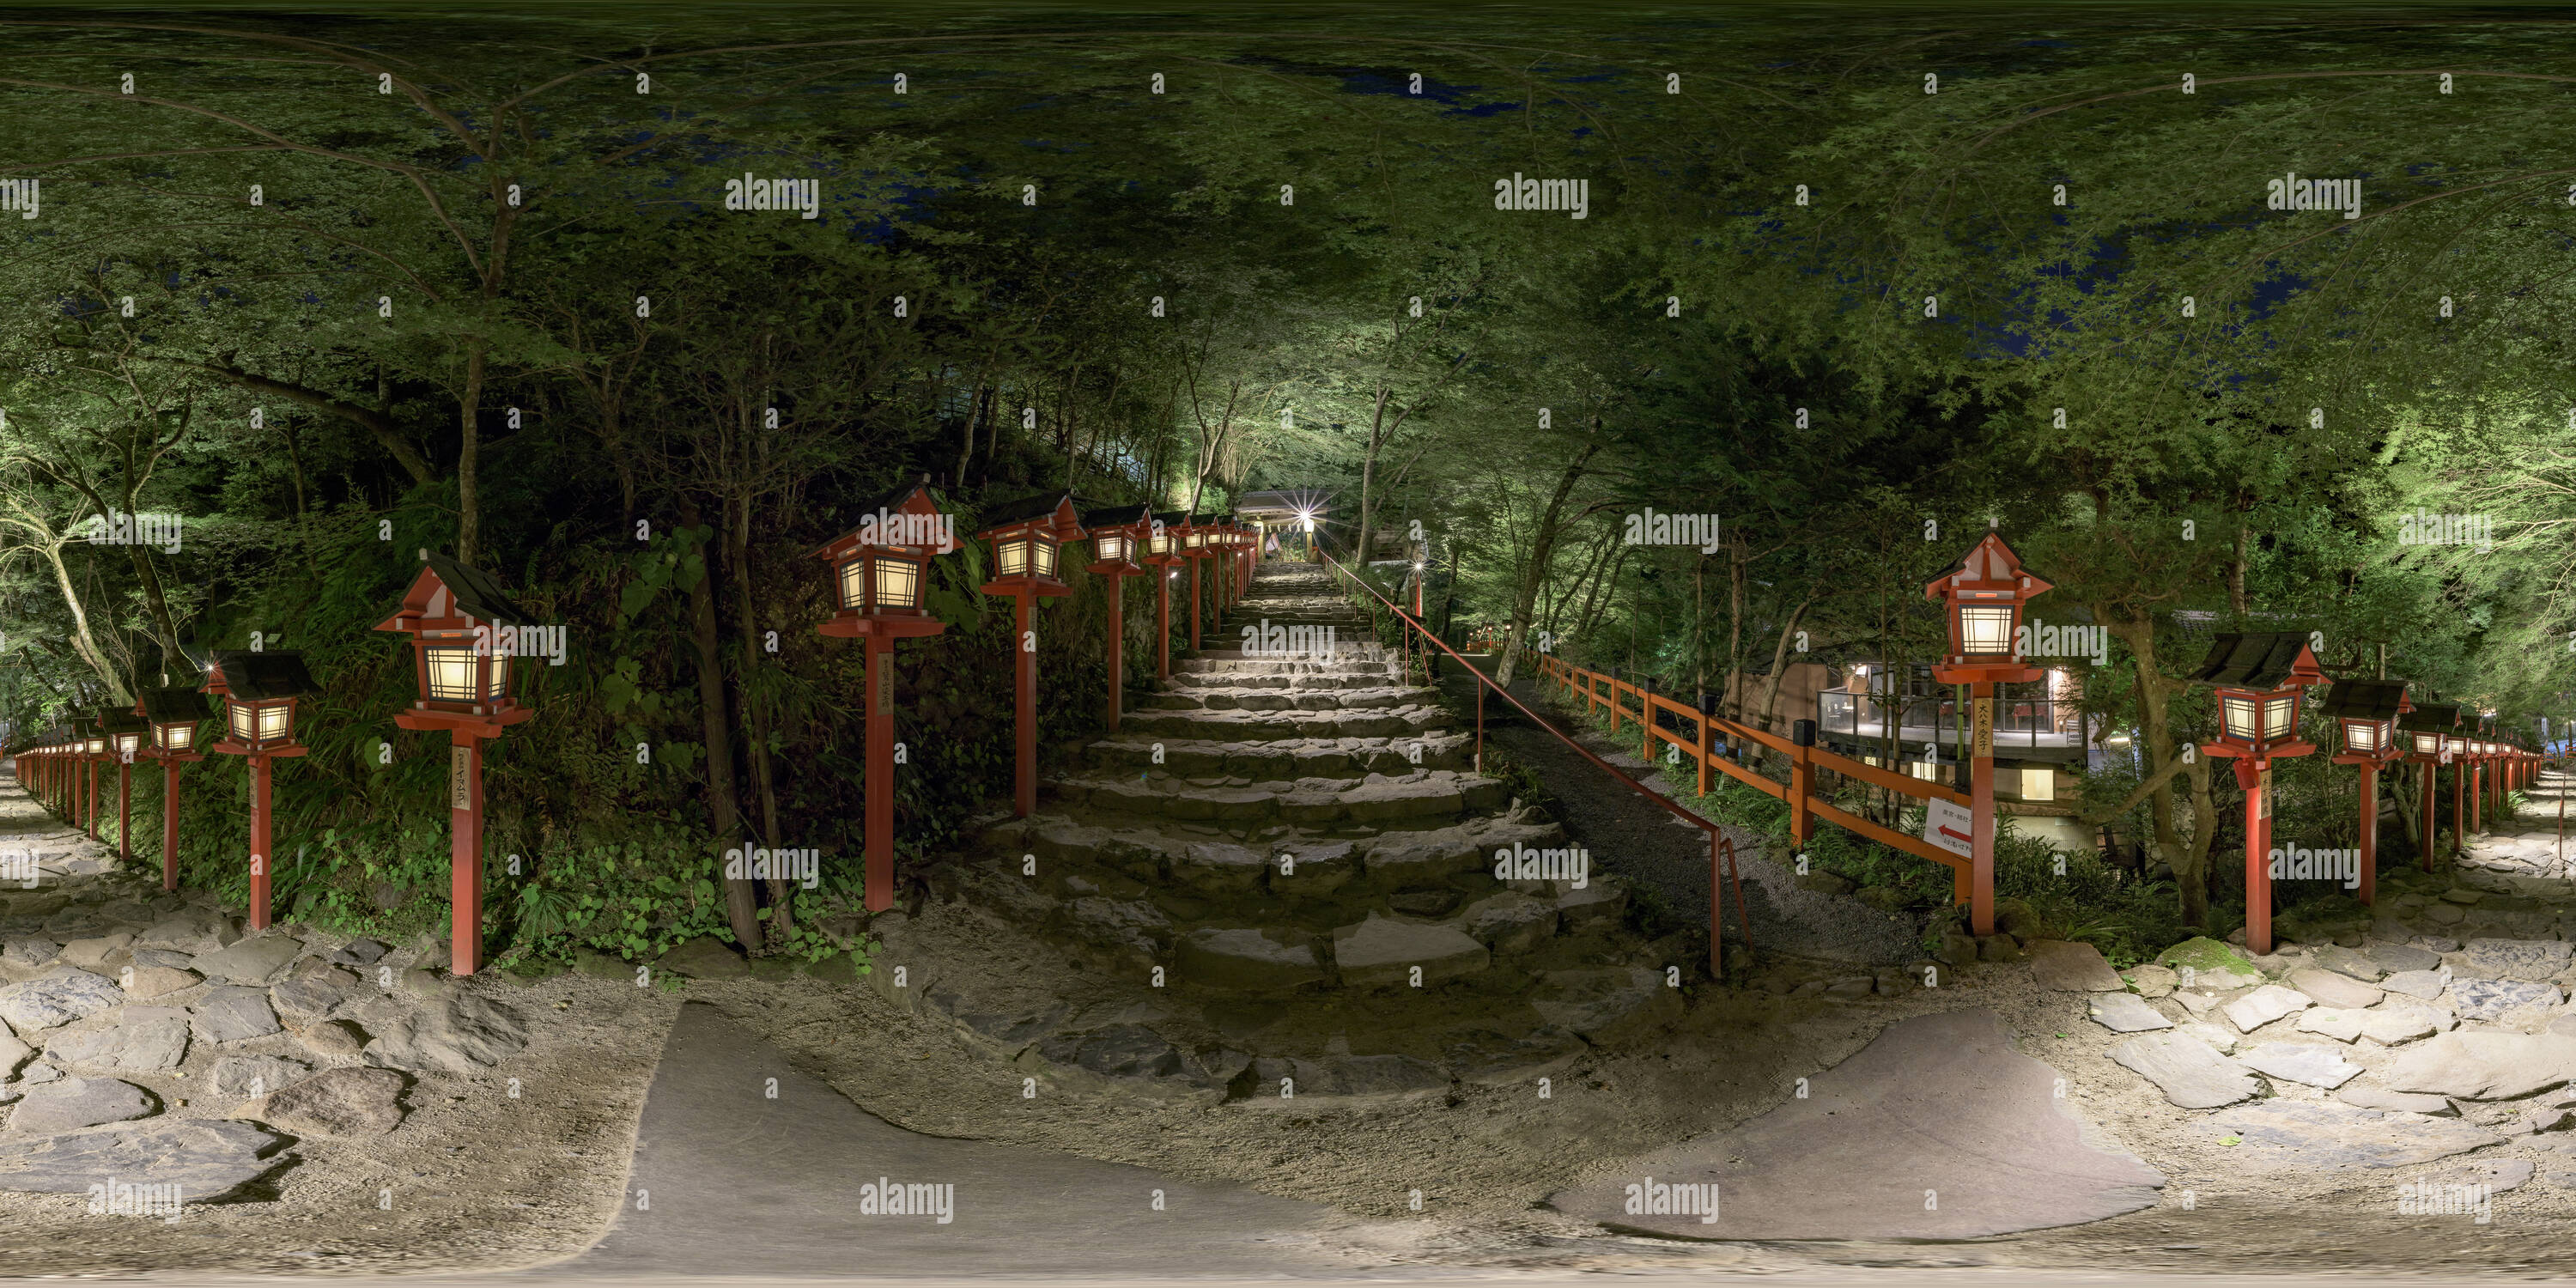 360 degree panoramic view of Kibune Shrine at night with lights on the lantern in Kyoto, Japan 03